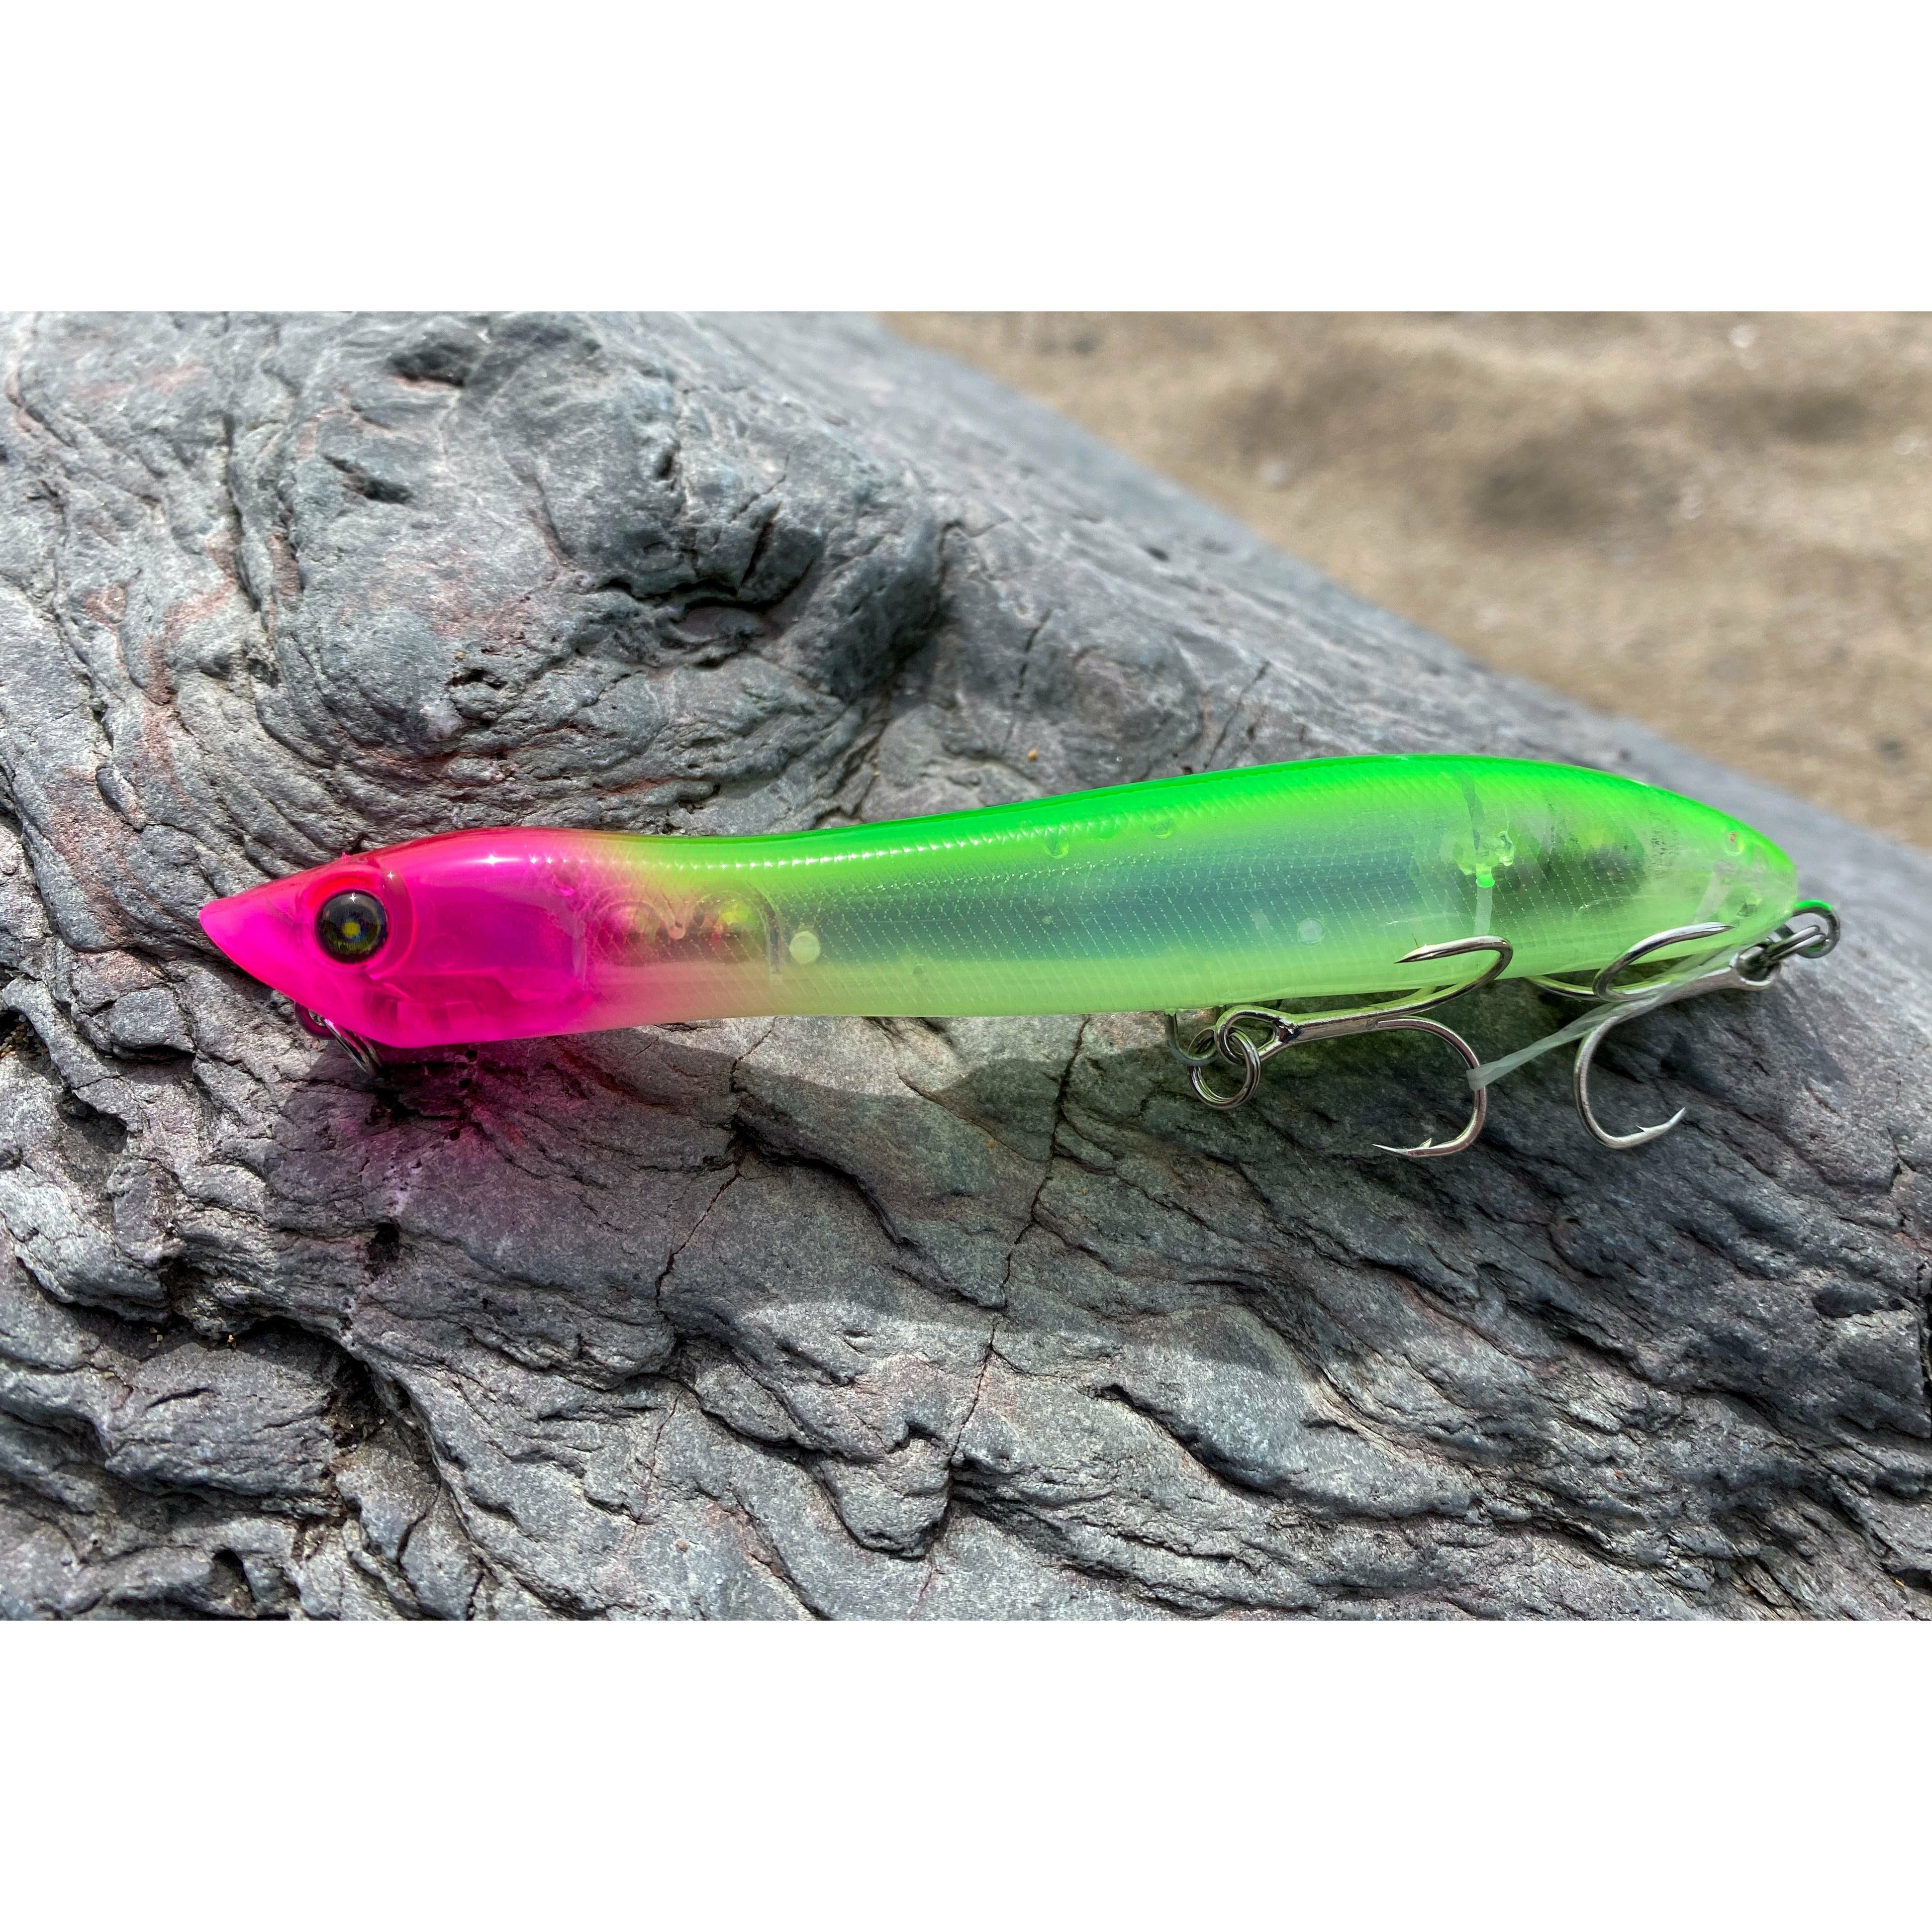 Soft Bird Fishing Lure for Freshwater Saltwater Topwater Lake - Saltwater  Freshwater Artificial Bird Lure for Bass, Trout, Pike and Articulated